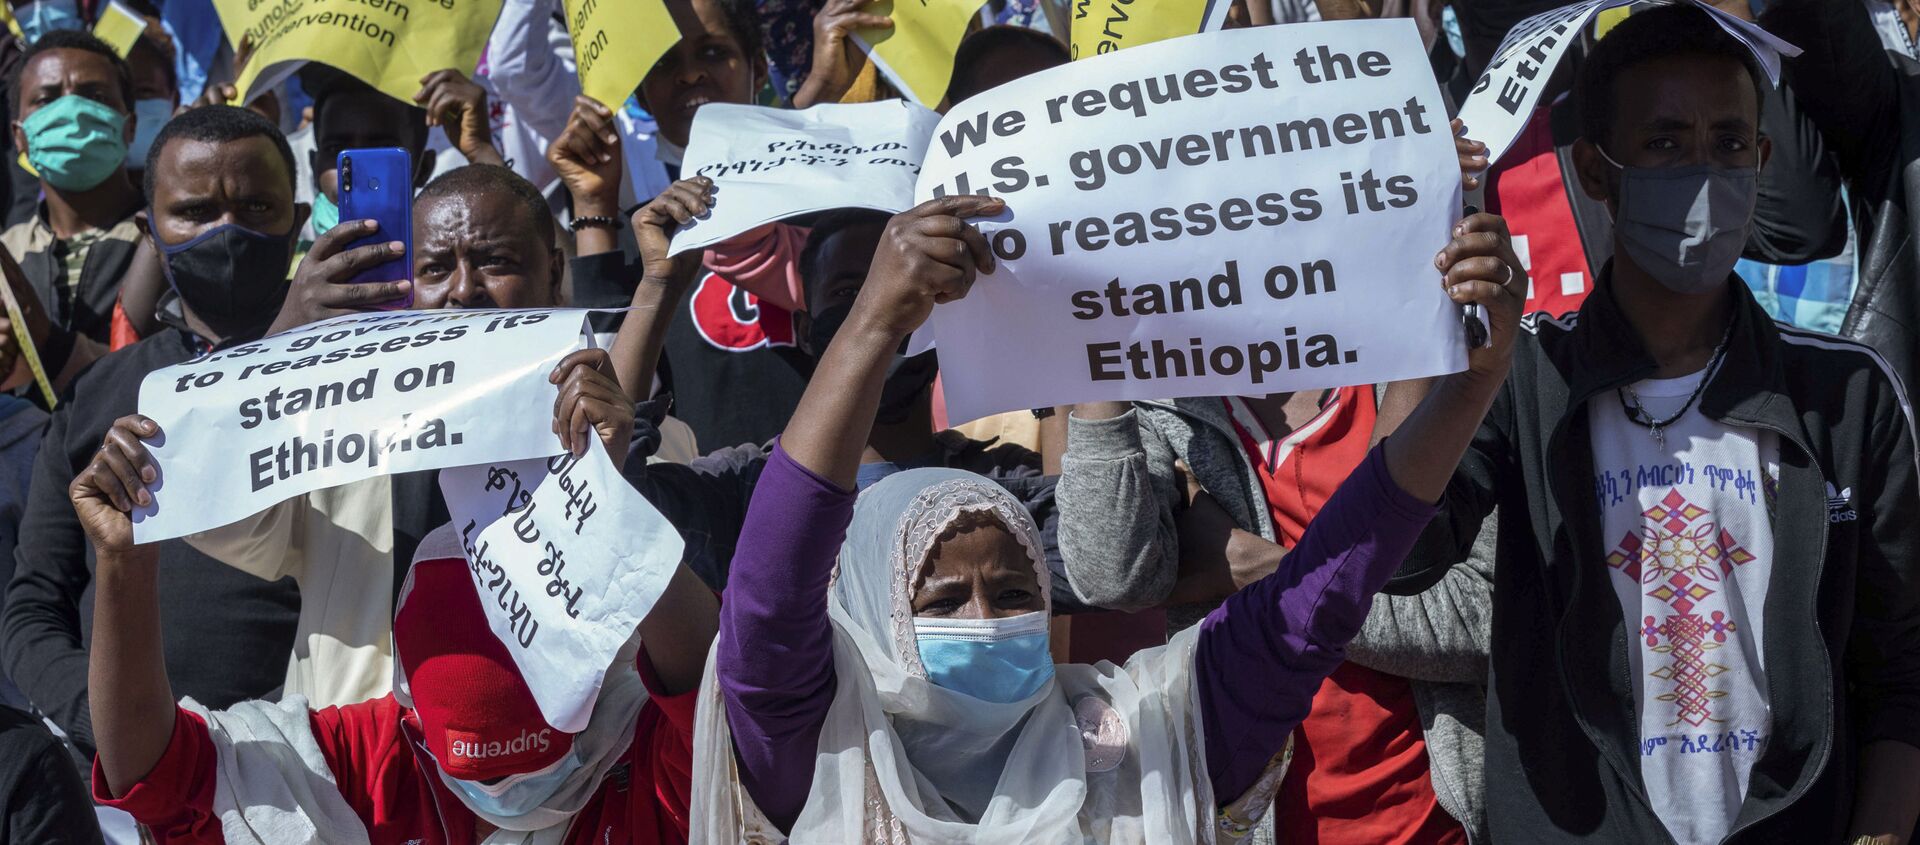 Ethiopians protest against US sanctions on the government over the conflict in Tigray on 30 May 2021. - Sputnik International, 1920, 01.06.2021